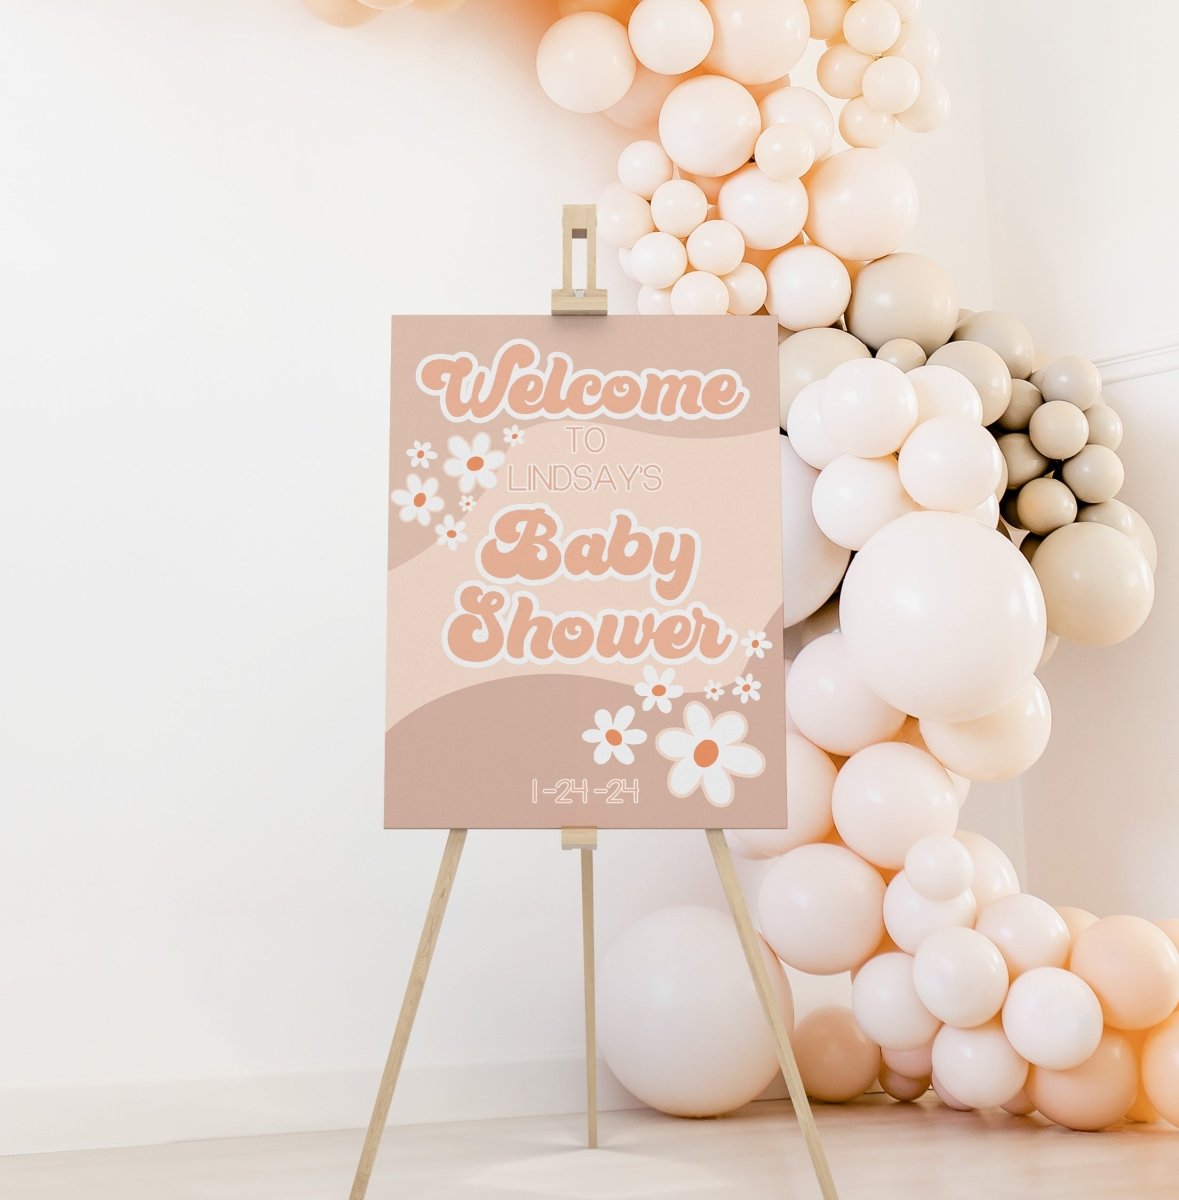 Daisy Baby Shower Welcome Sign - Daisy, gender_girl, text